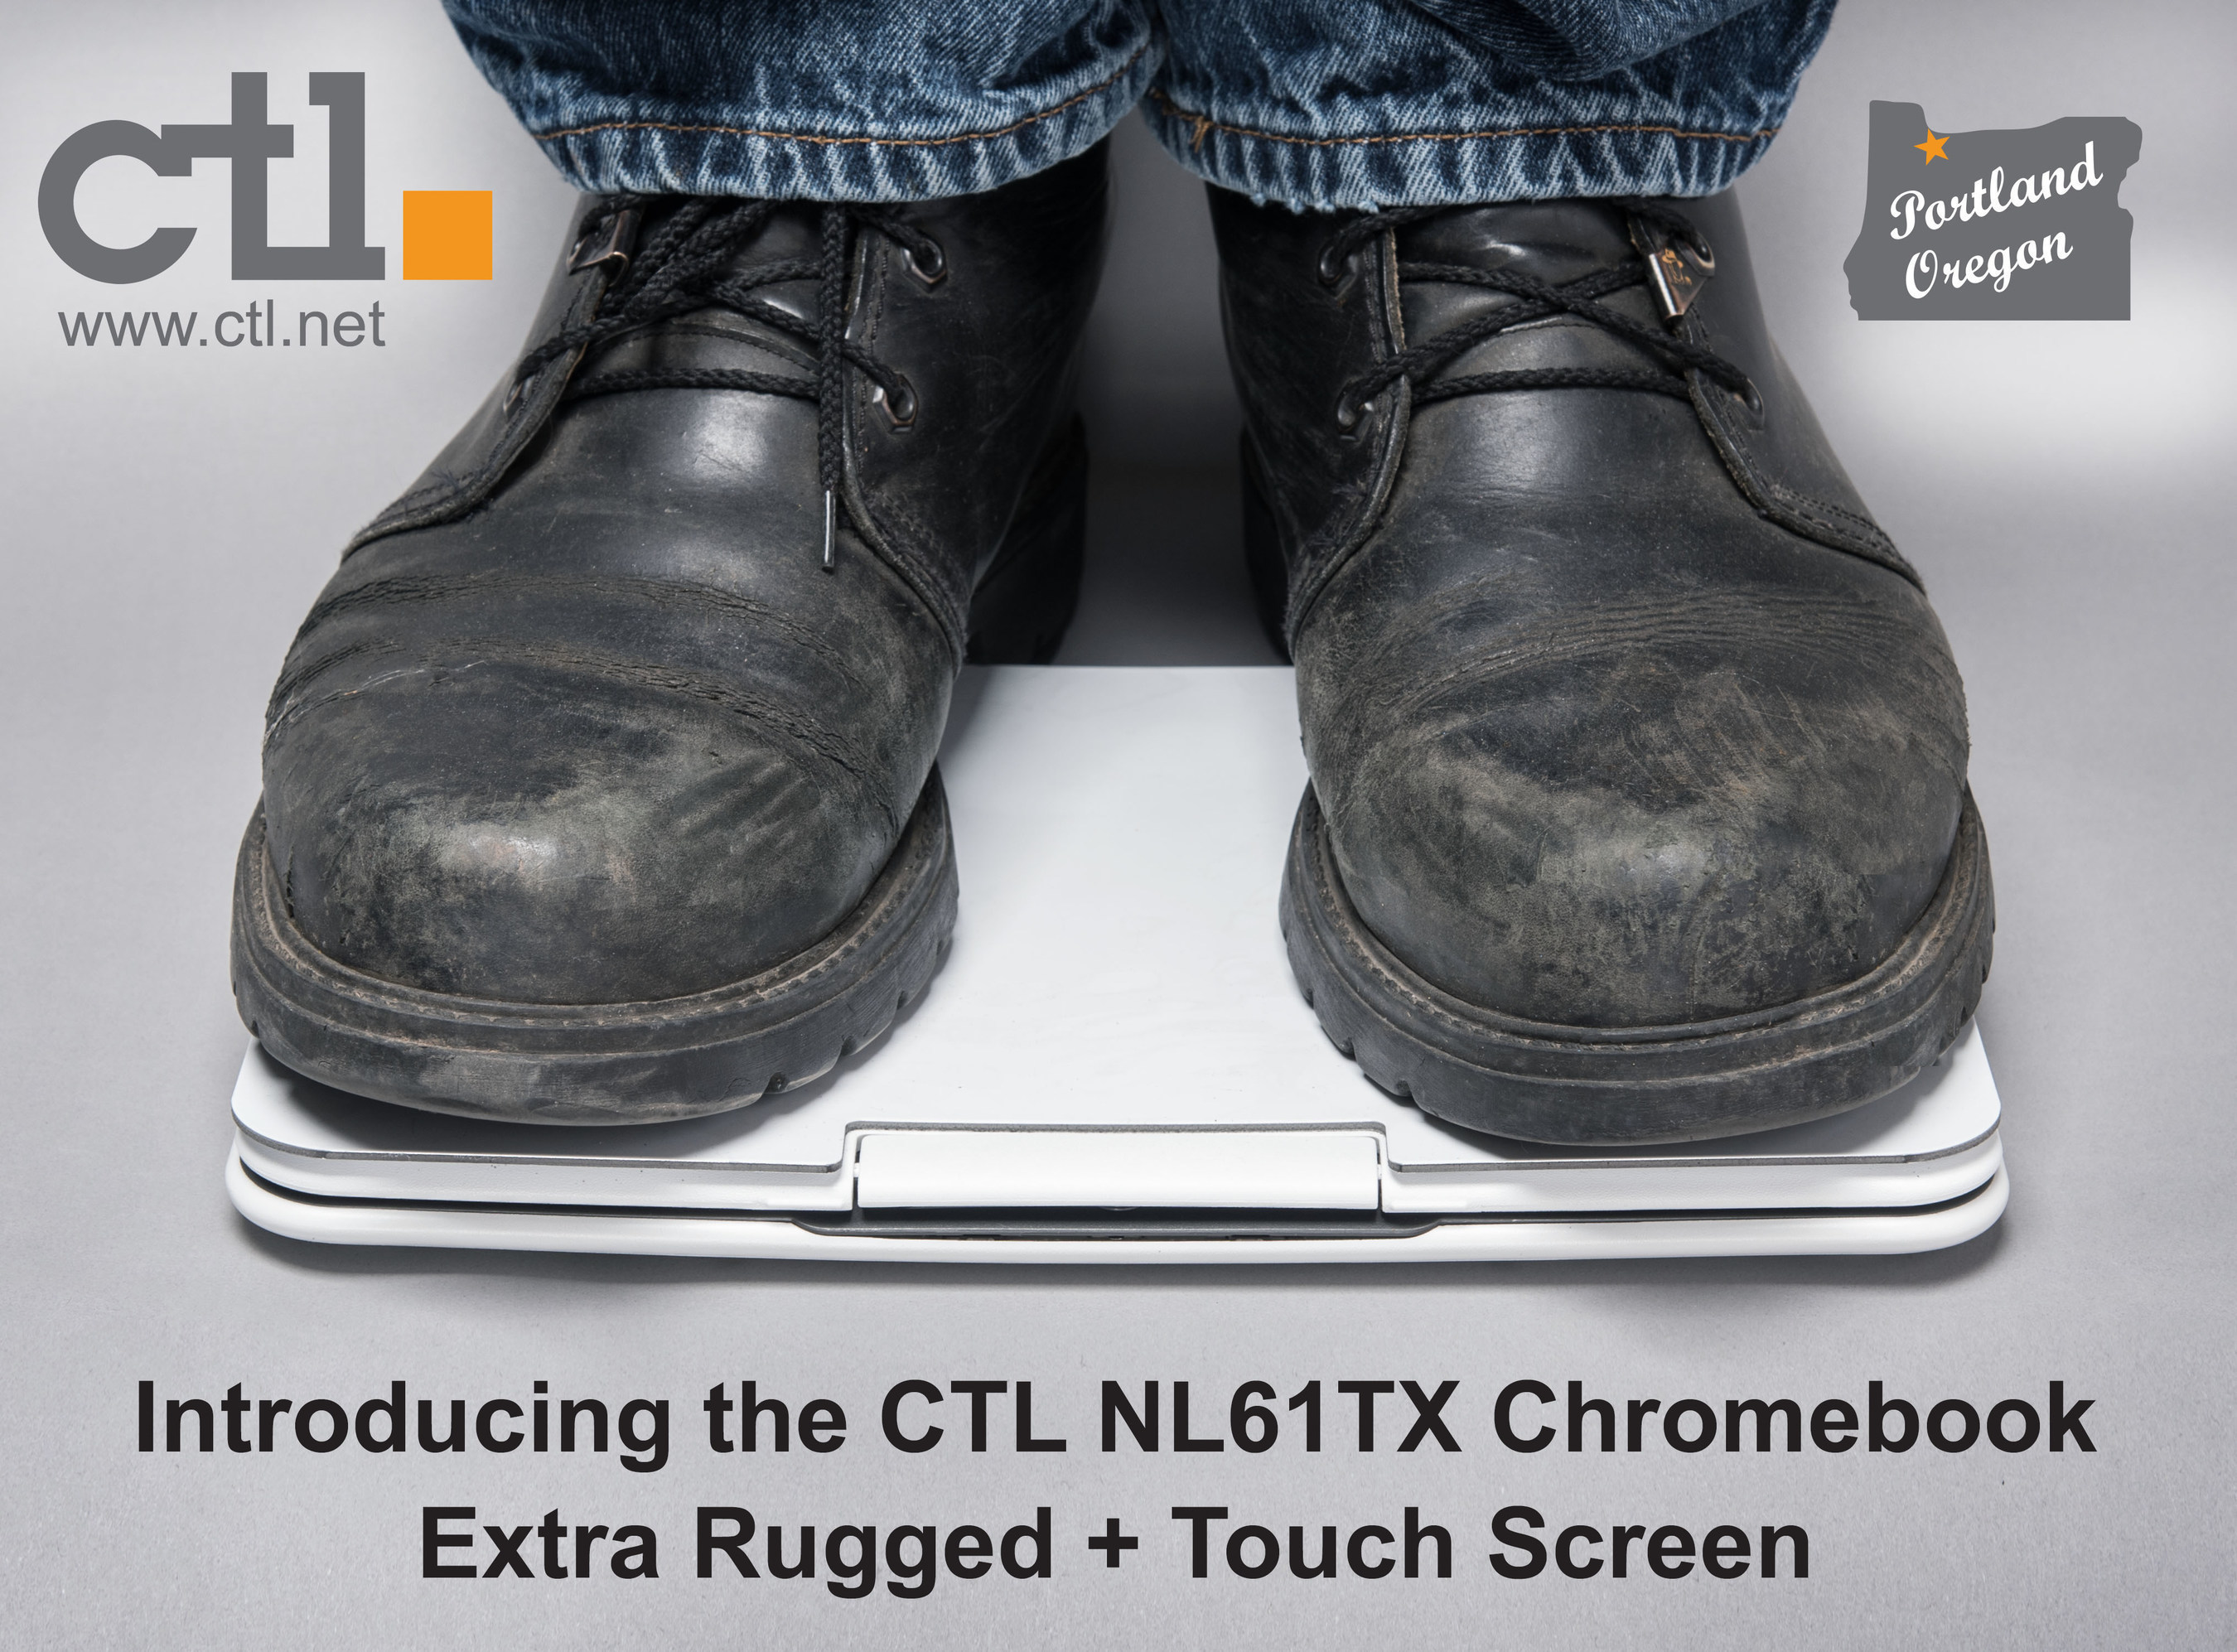 The CTL NL61TX touchscreen Chromebook for education isn't just rugged, it's eXtra rugged.